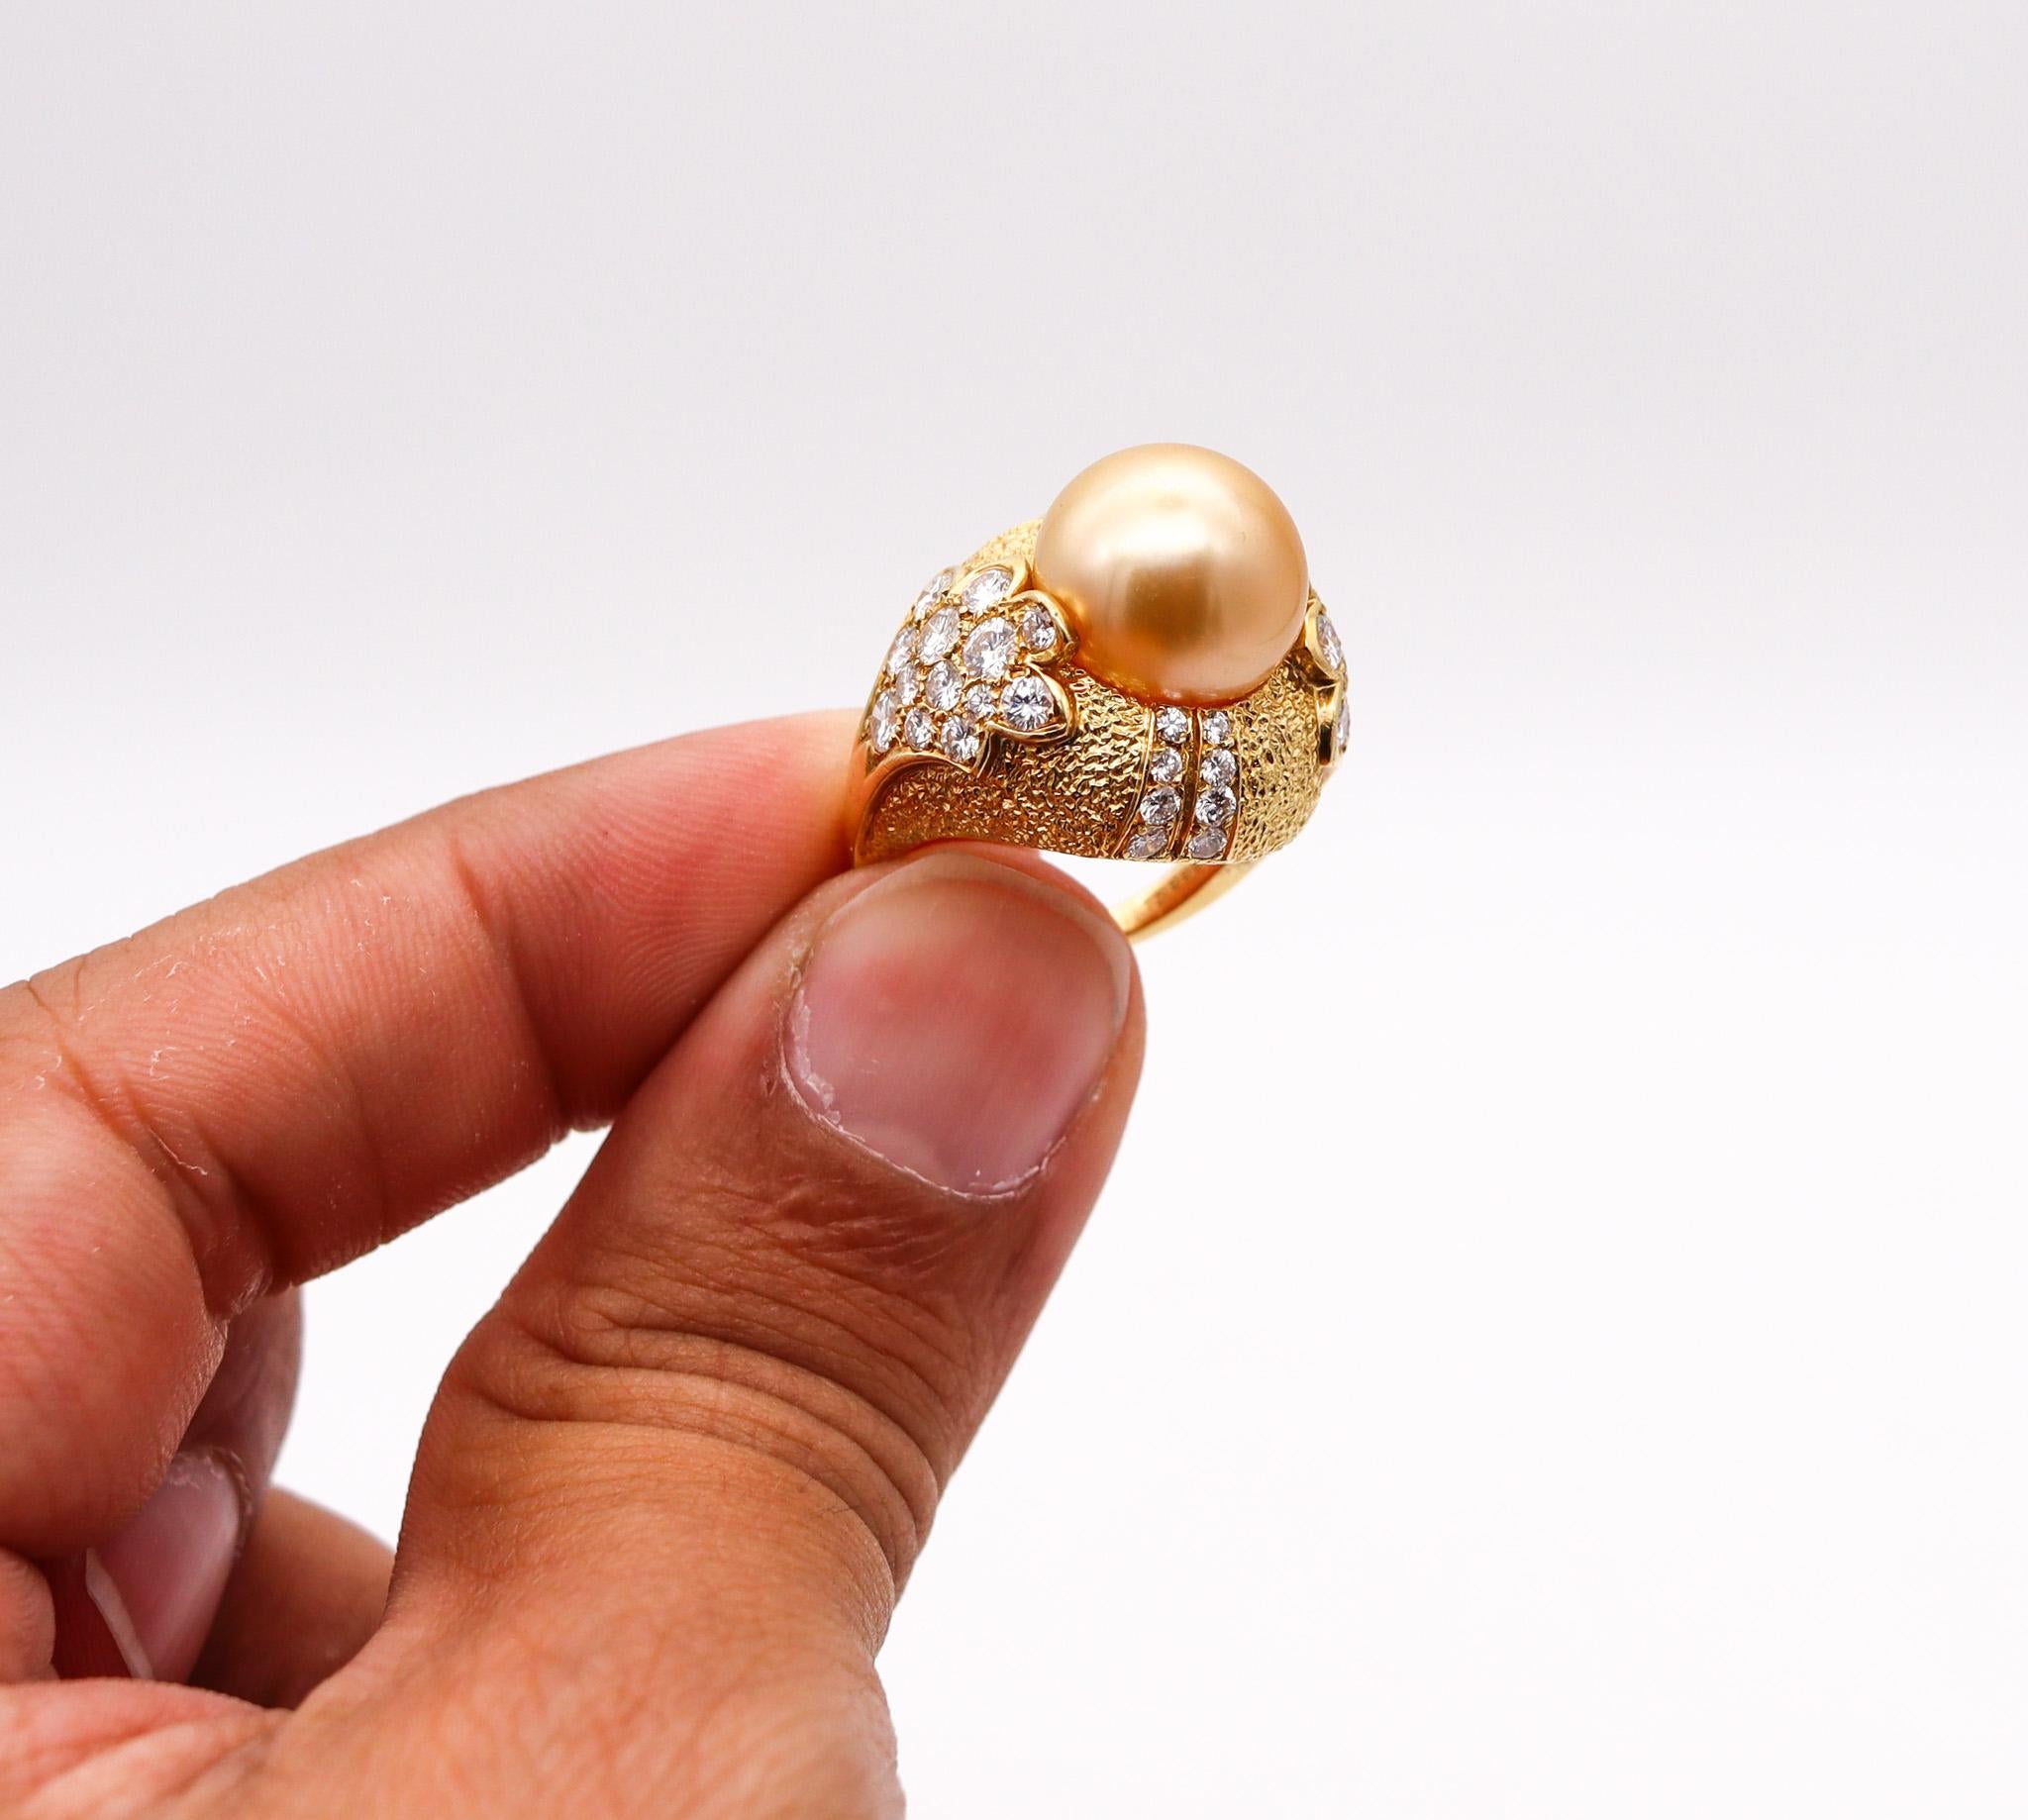 Van Cleef & Arpels Golden Pearl Cocktail Ring 18Kt Gold With 3.46 Ctw Diamonds For Sale 1